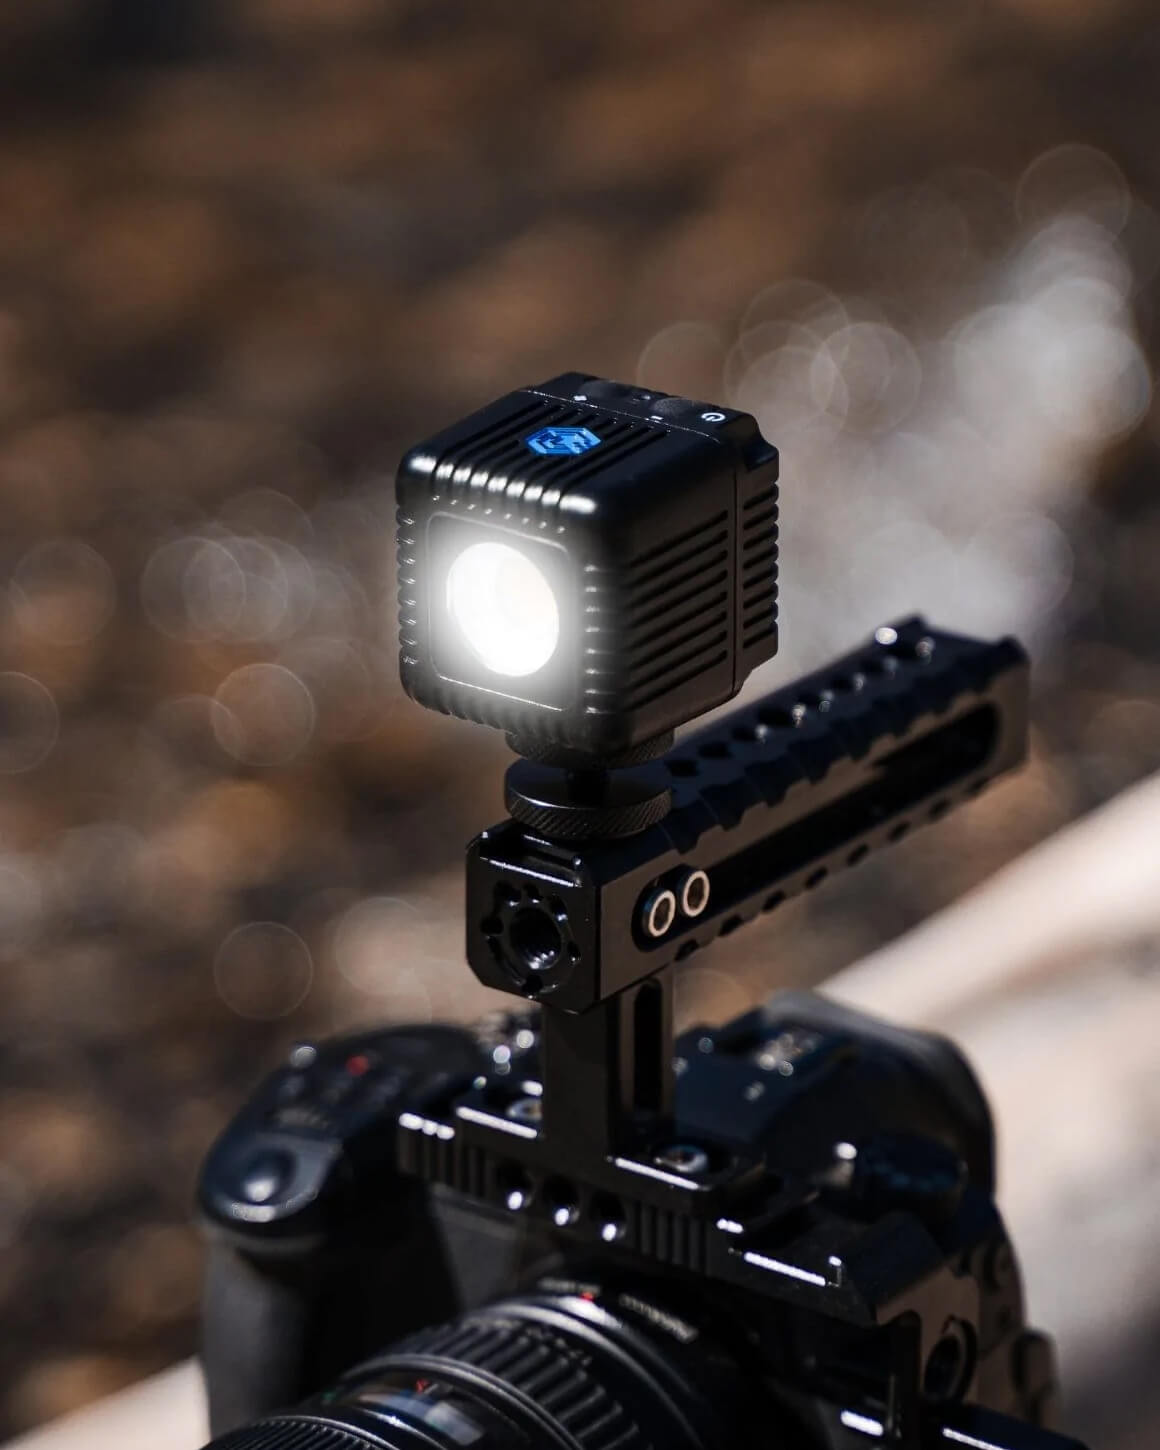 Black 1.5" Lume Cube 2.0 Waterproof LED attached to black jig on camera.